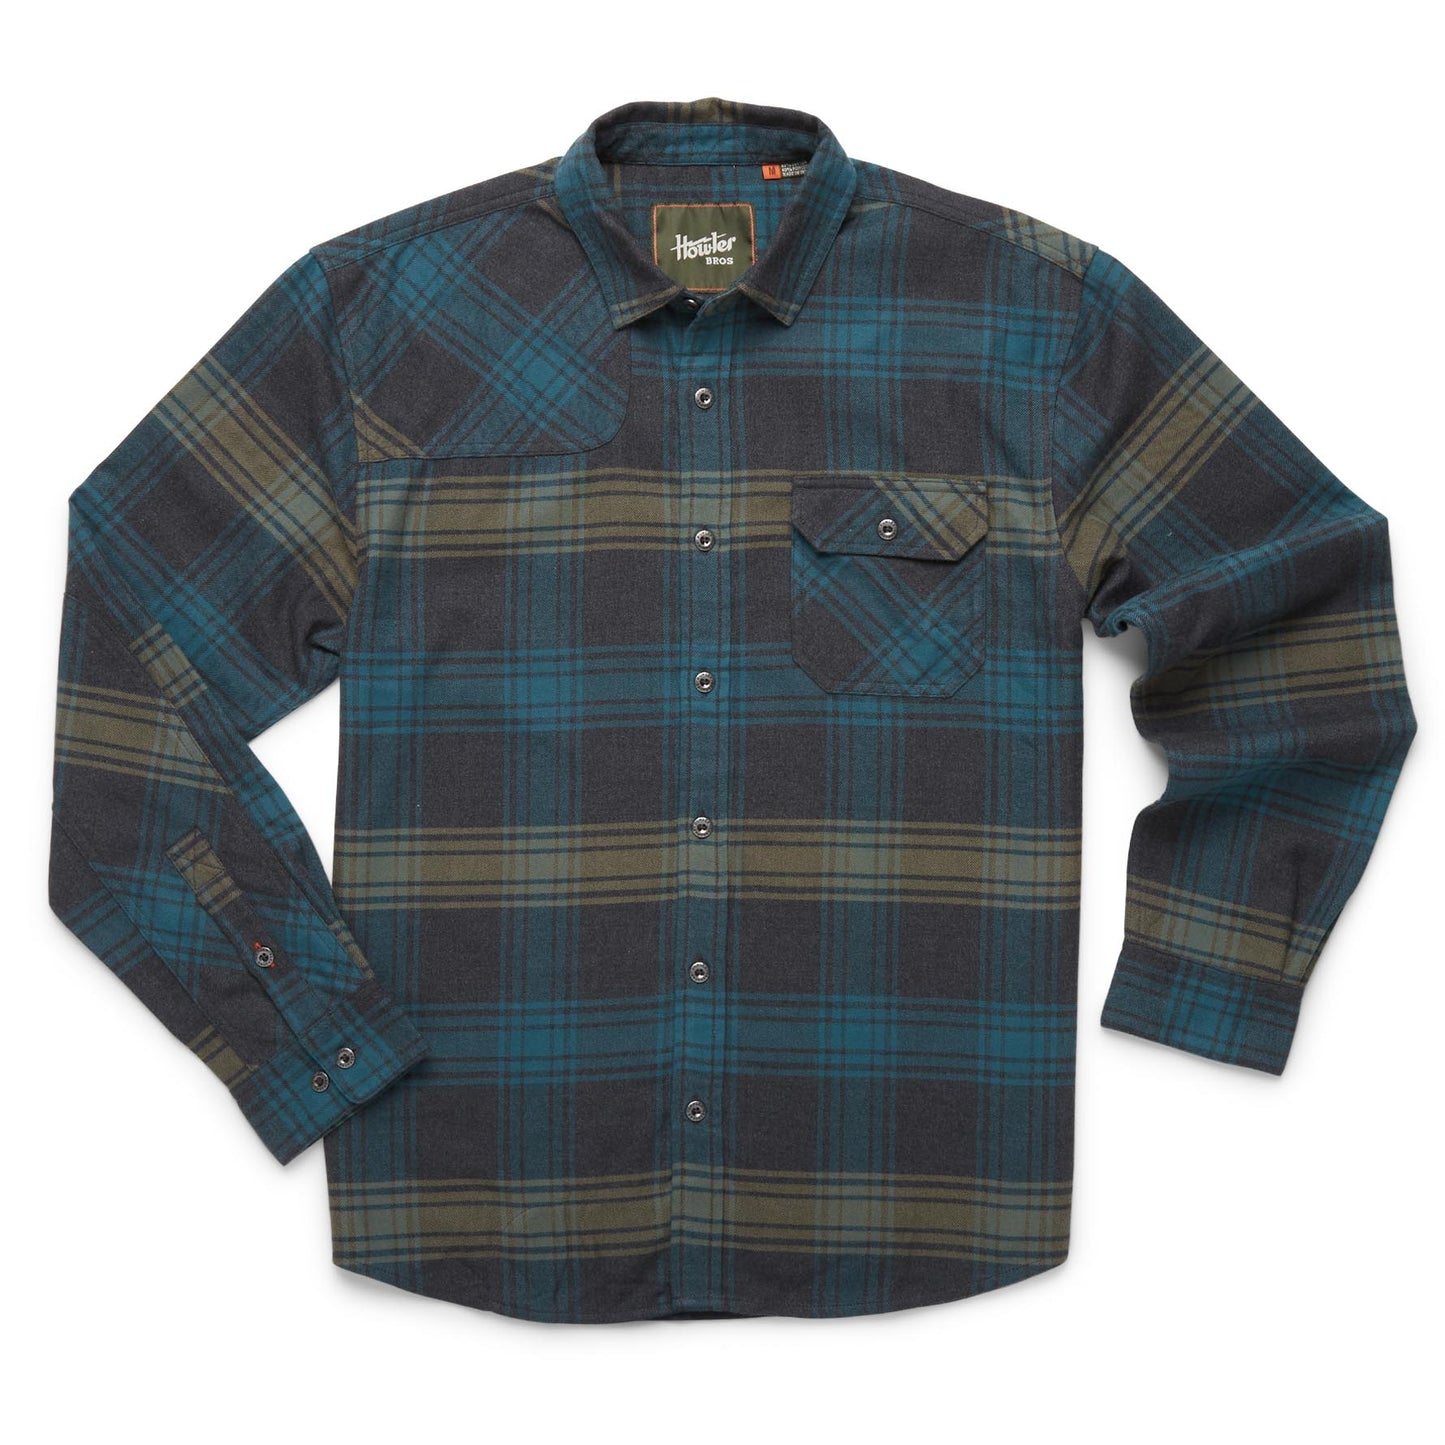 Howler Brothers Harker's Flannel - Mesa Plaid